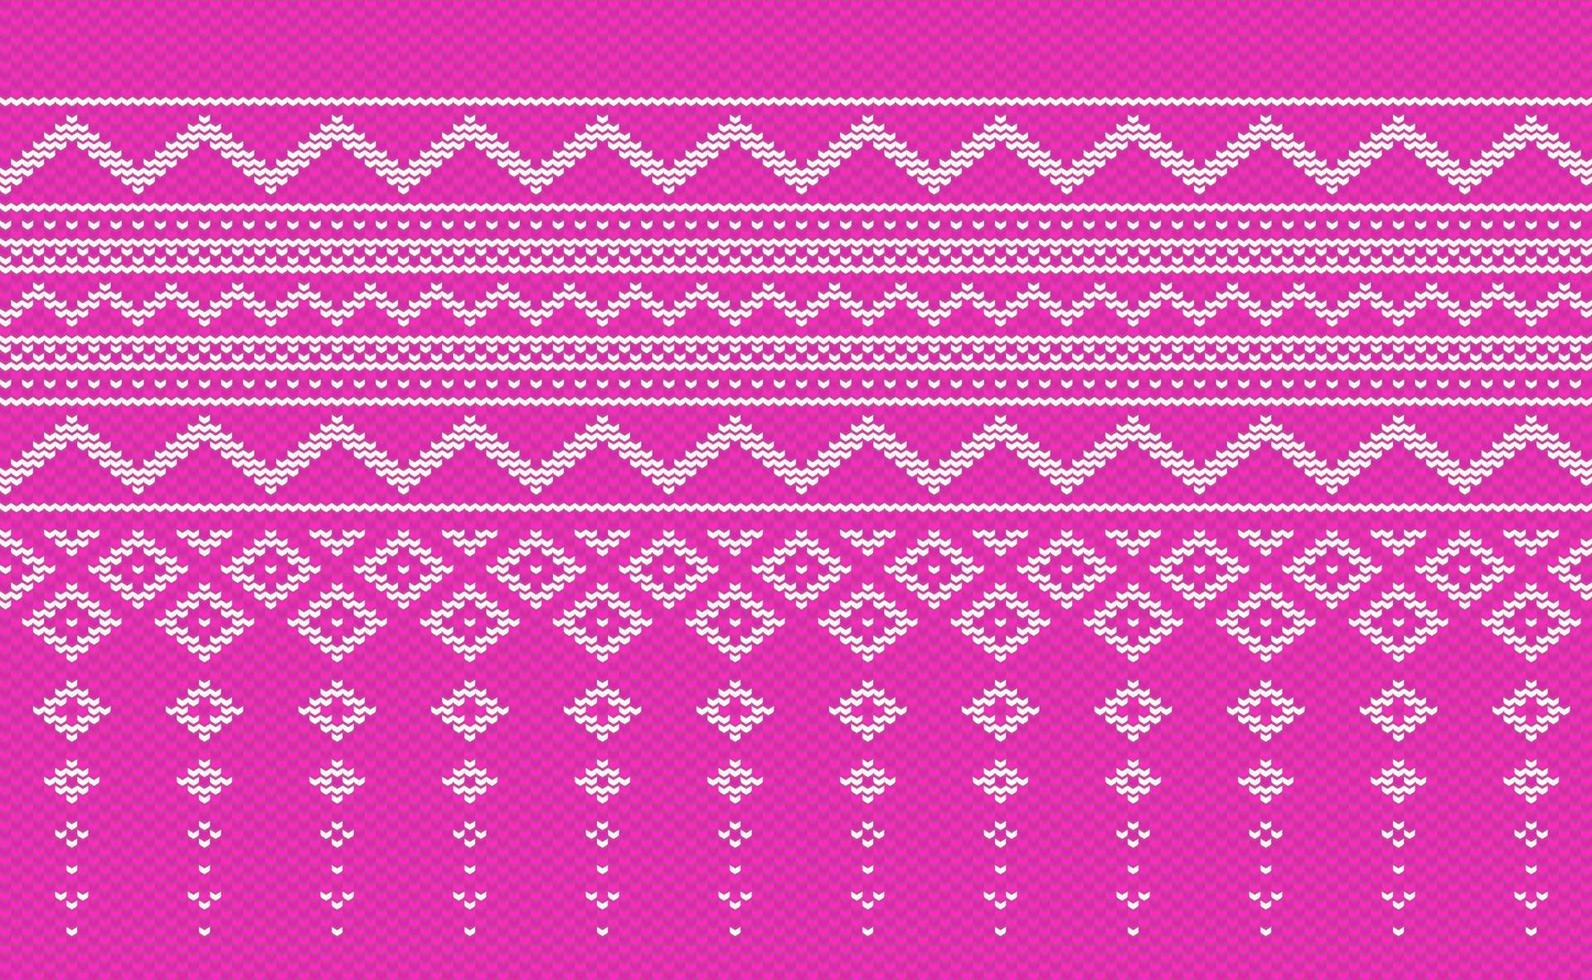 Design knit pattern vector, Cross stitch ethnic knitting background, Embroidery decorative square style vector